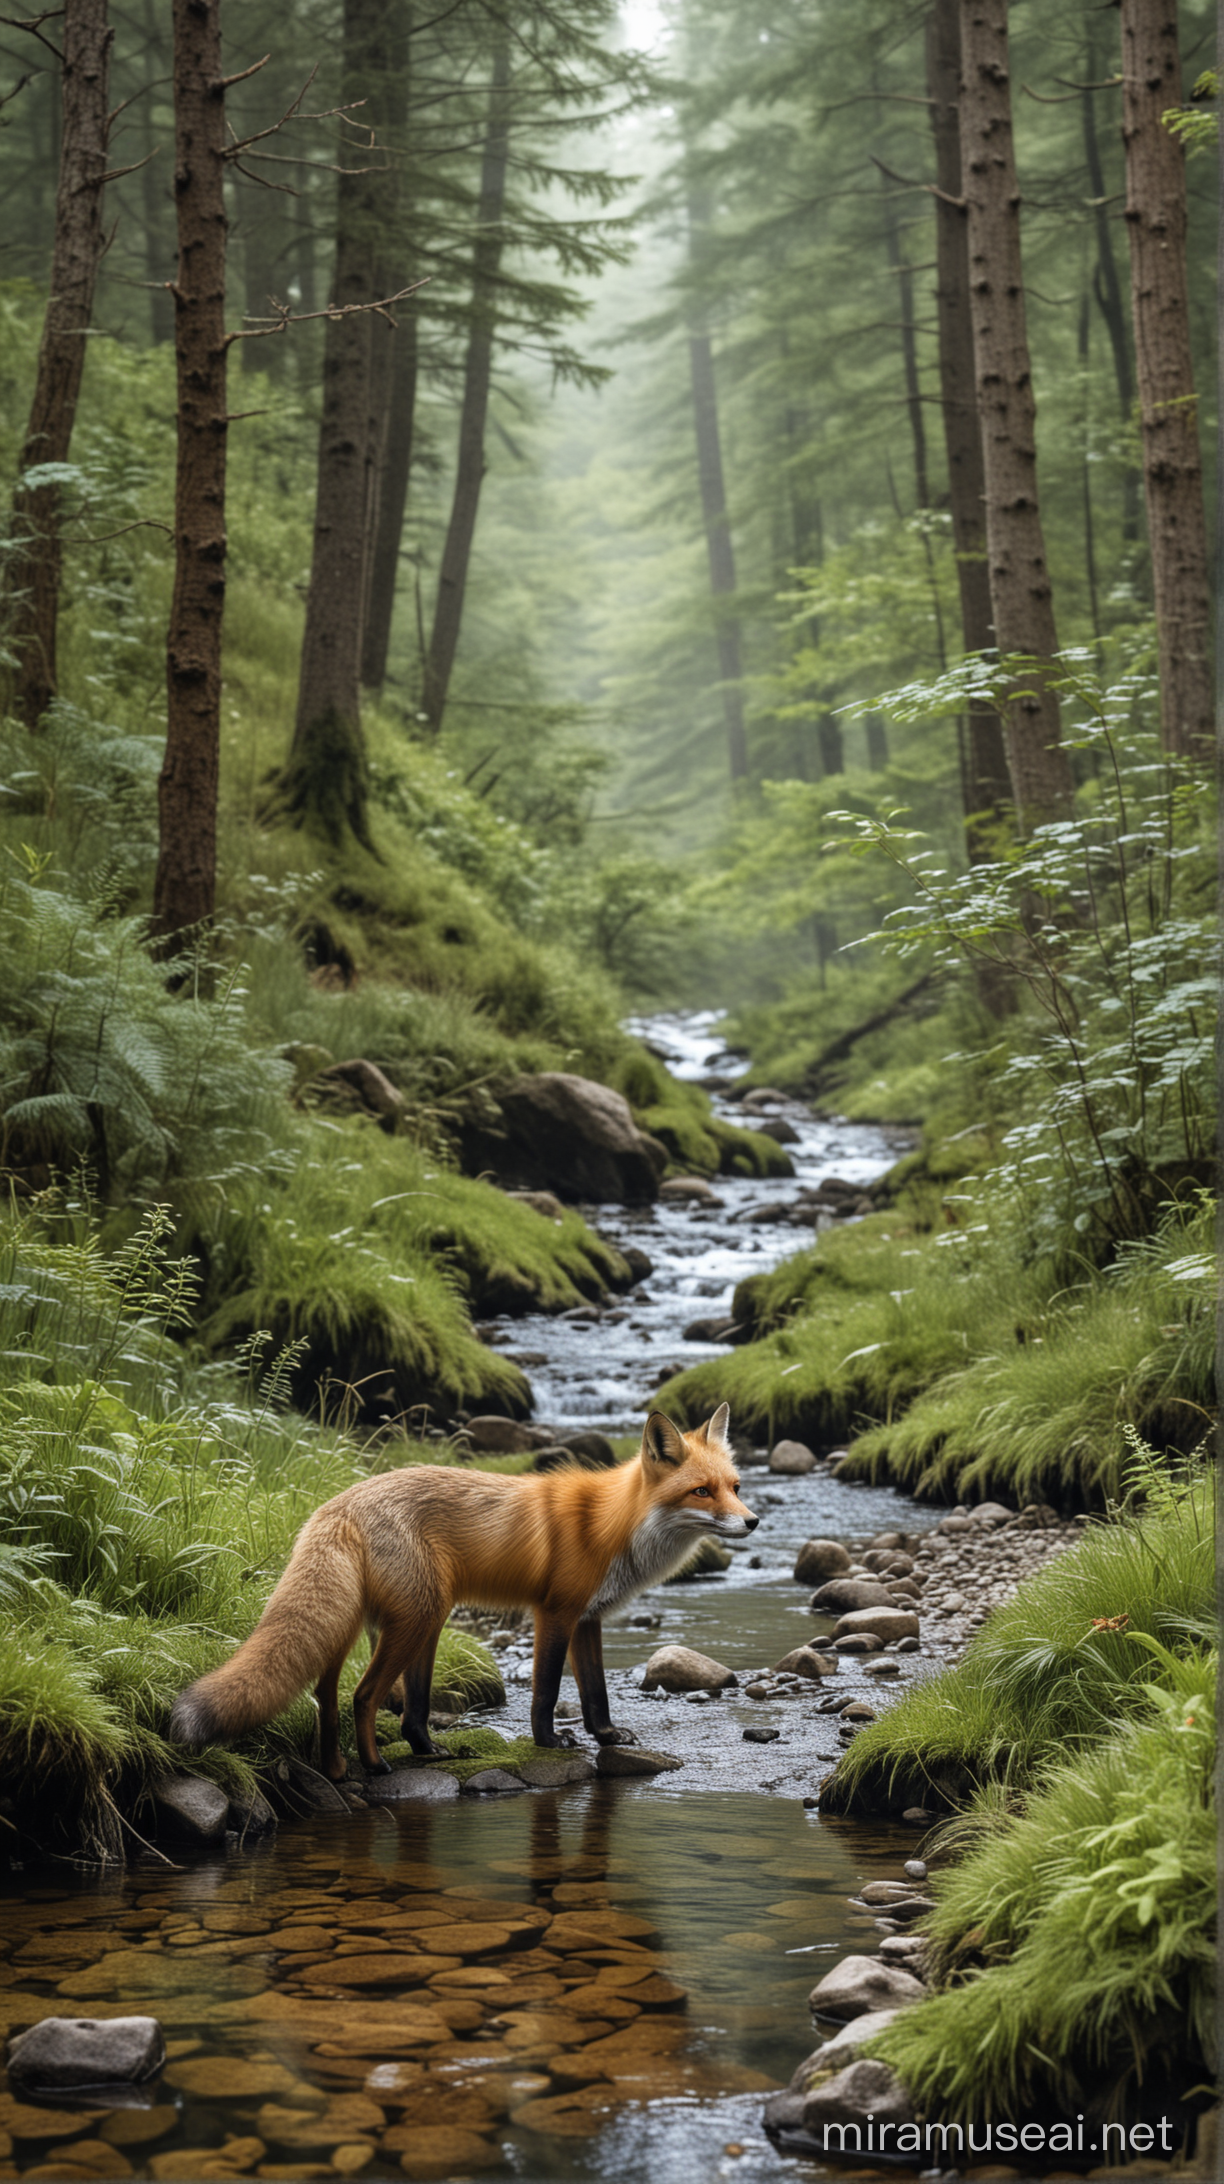 Fox in an alpine forest with a stream nearby